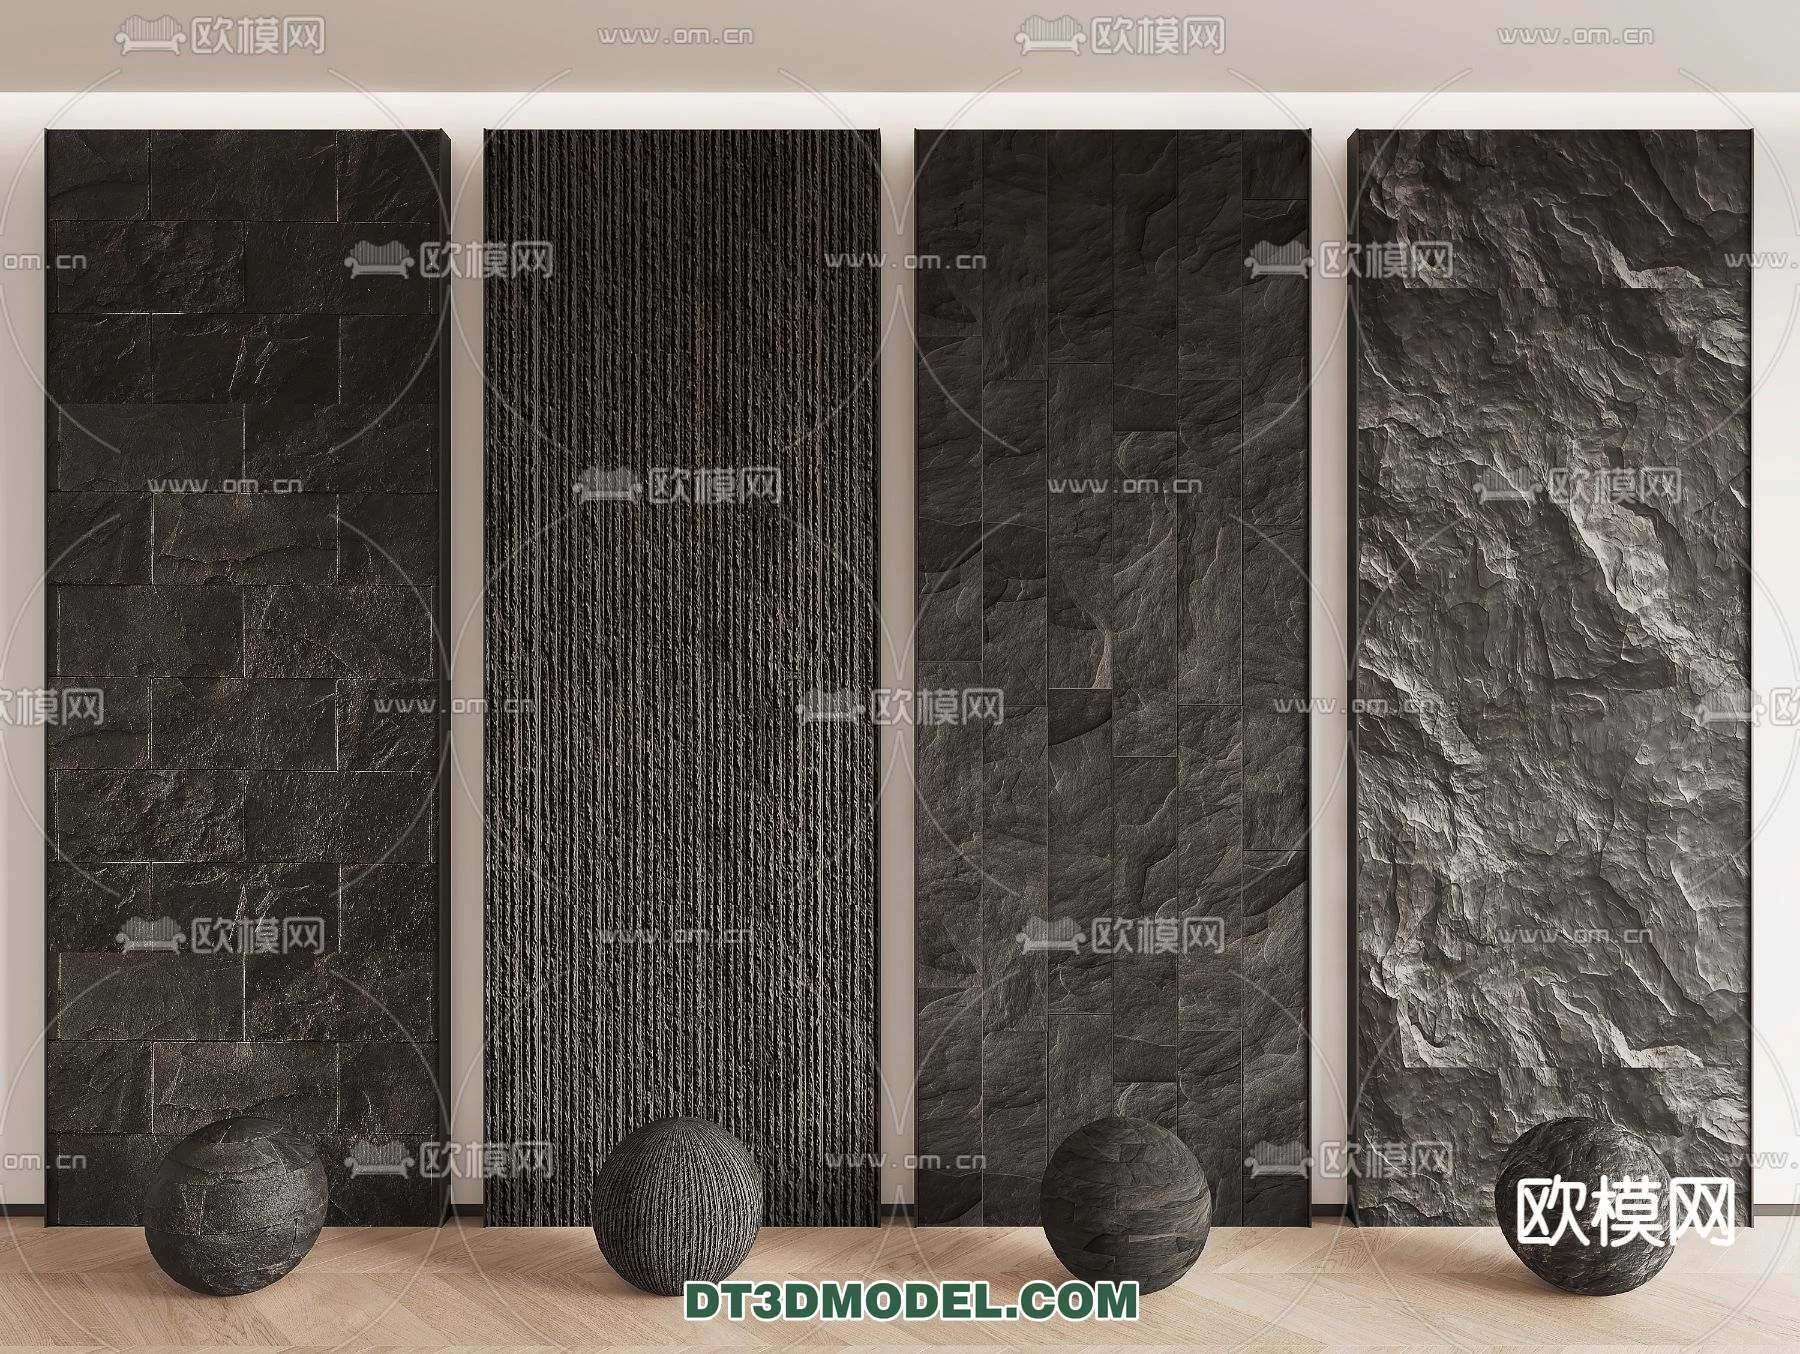 MATERIAL – TEXTURES – ROCK WALL – 0060